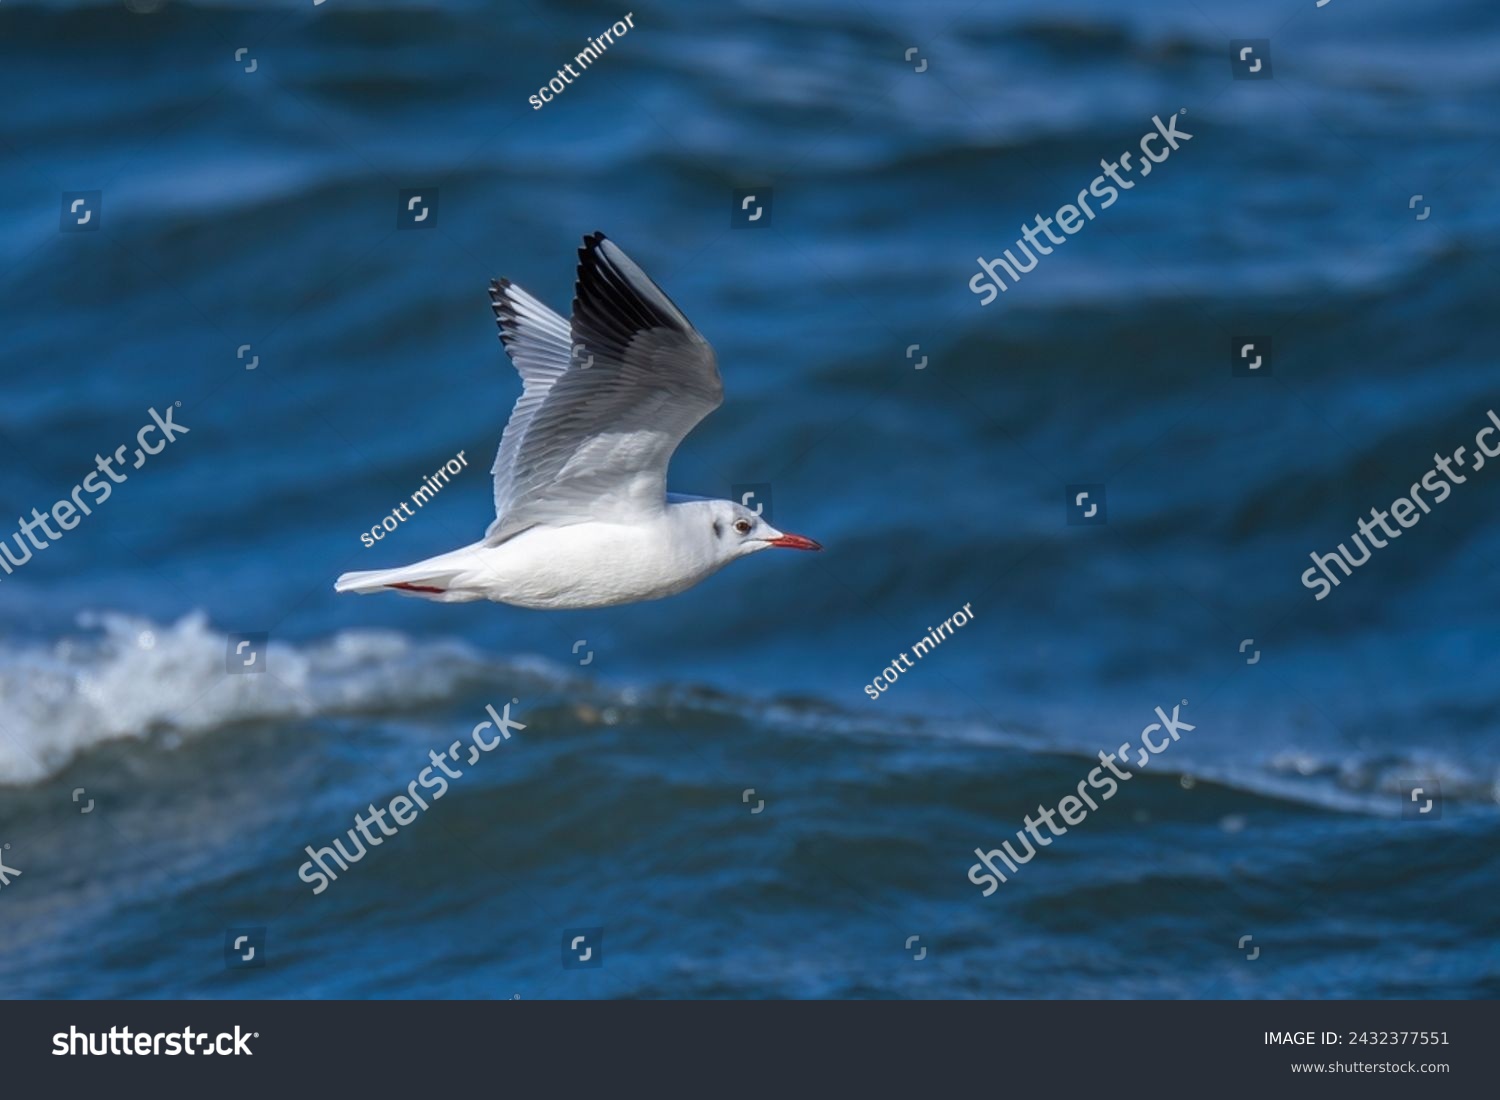 Flight scene of Black headed gull (Yurikamome) flying in the rough water surface background #2432377551